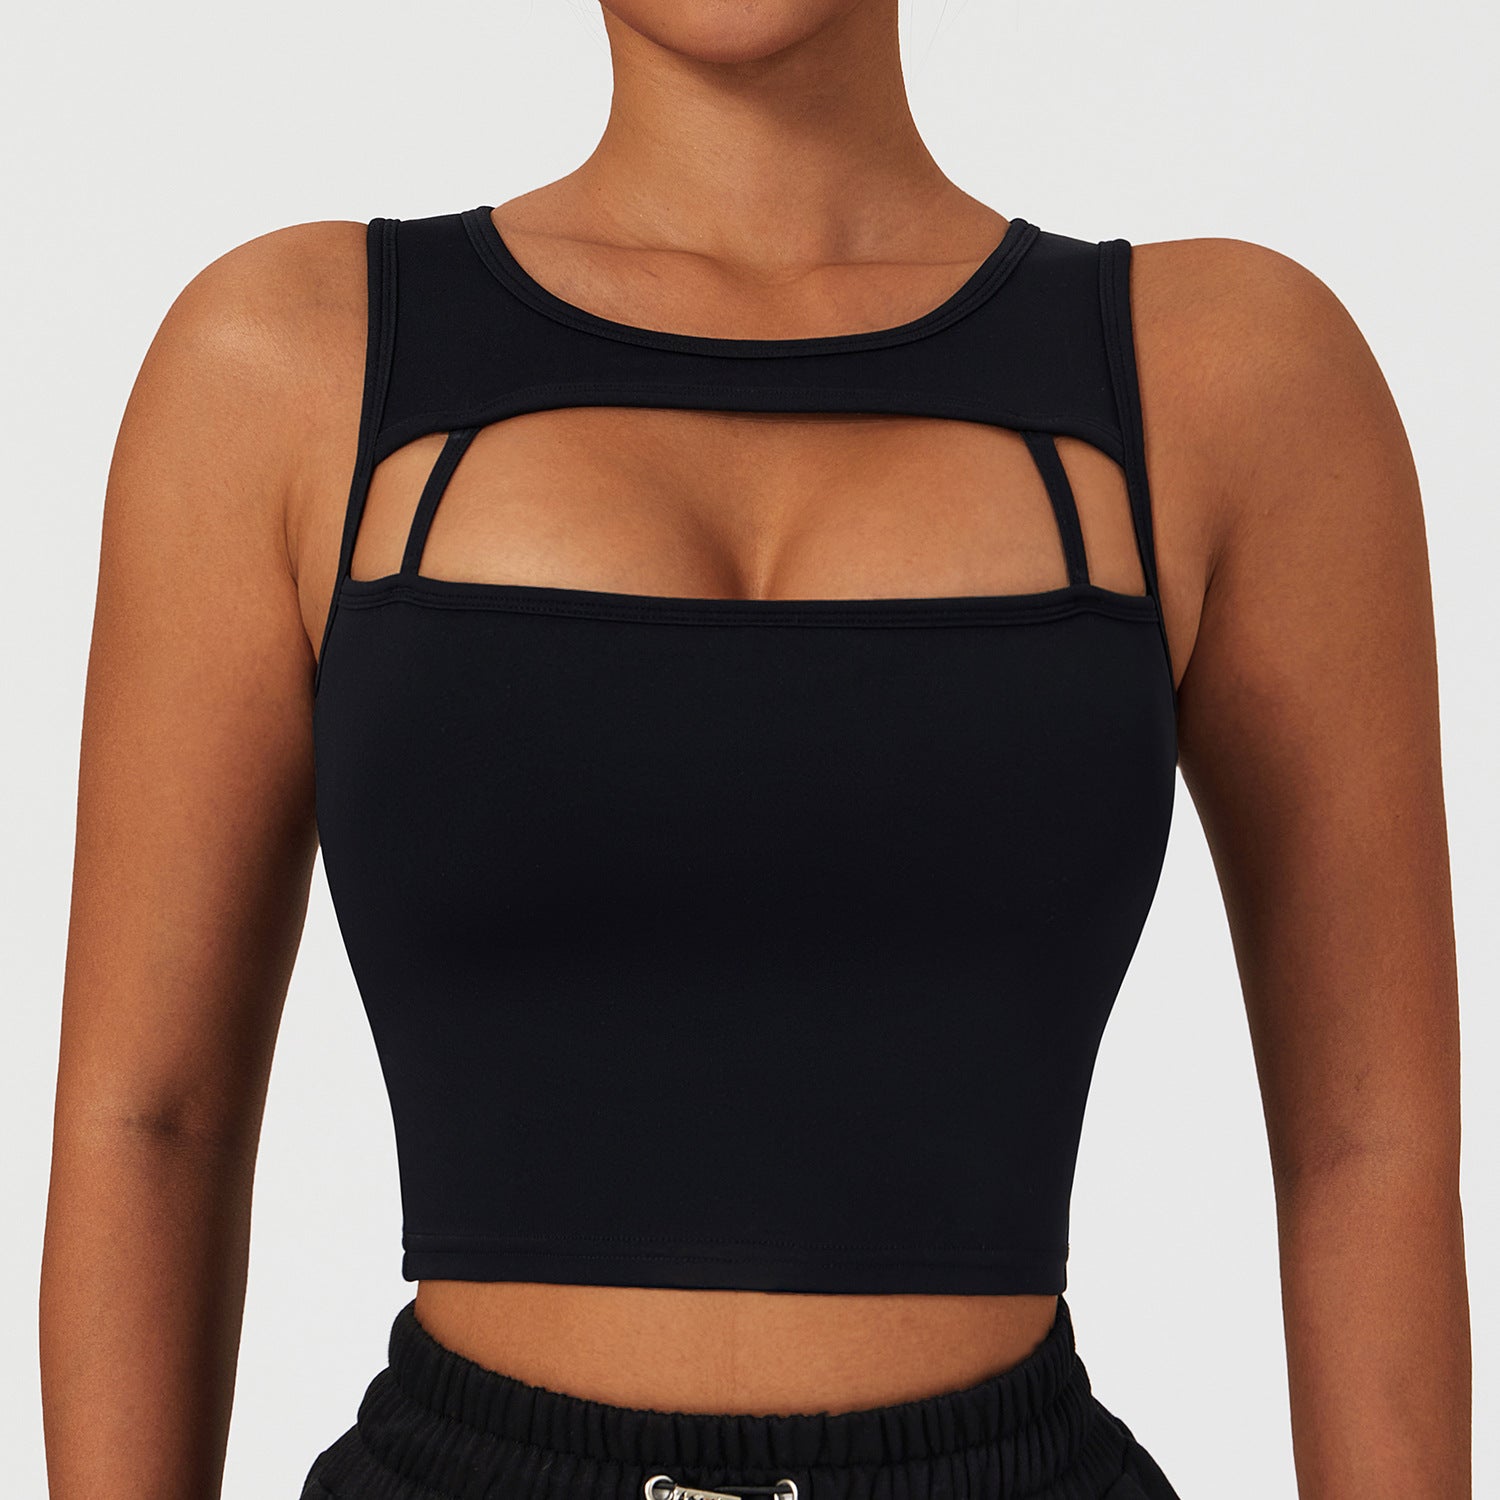 Hollow out removable padded sports bra